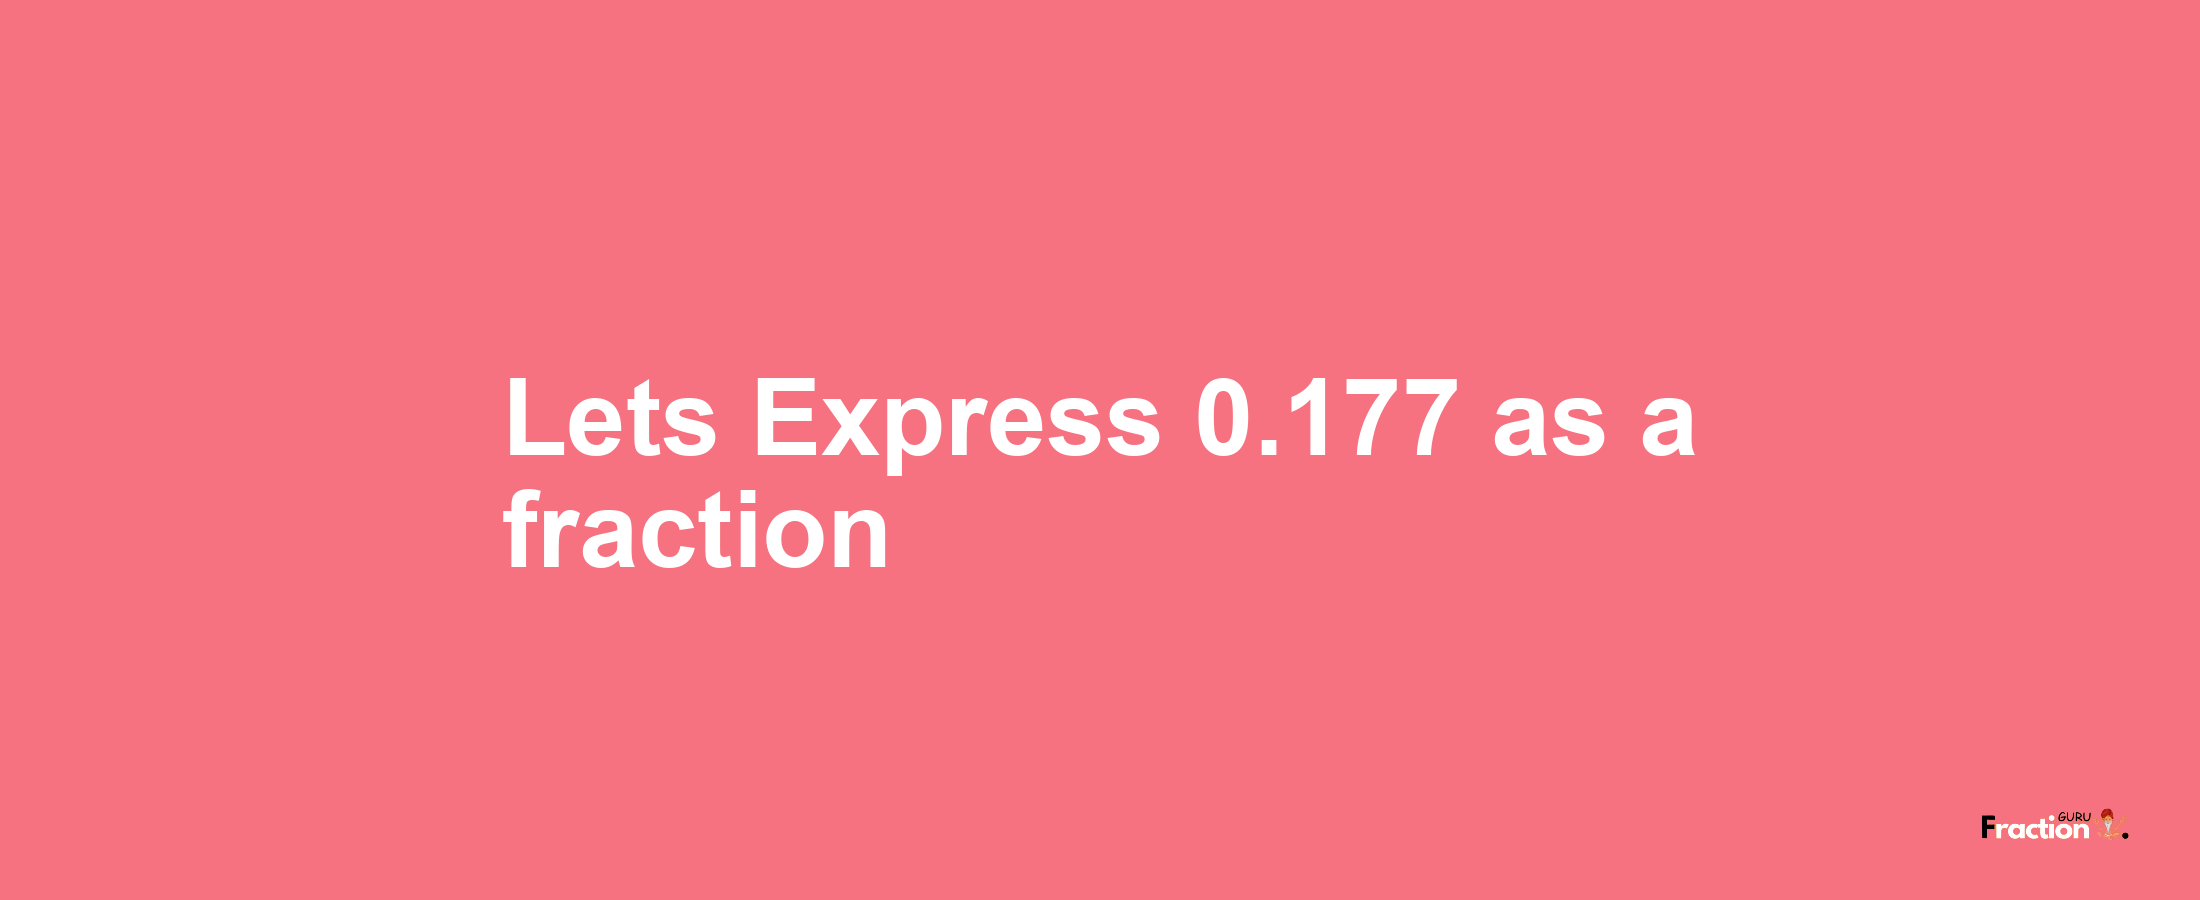 Lets Express 0.177 as afraction